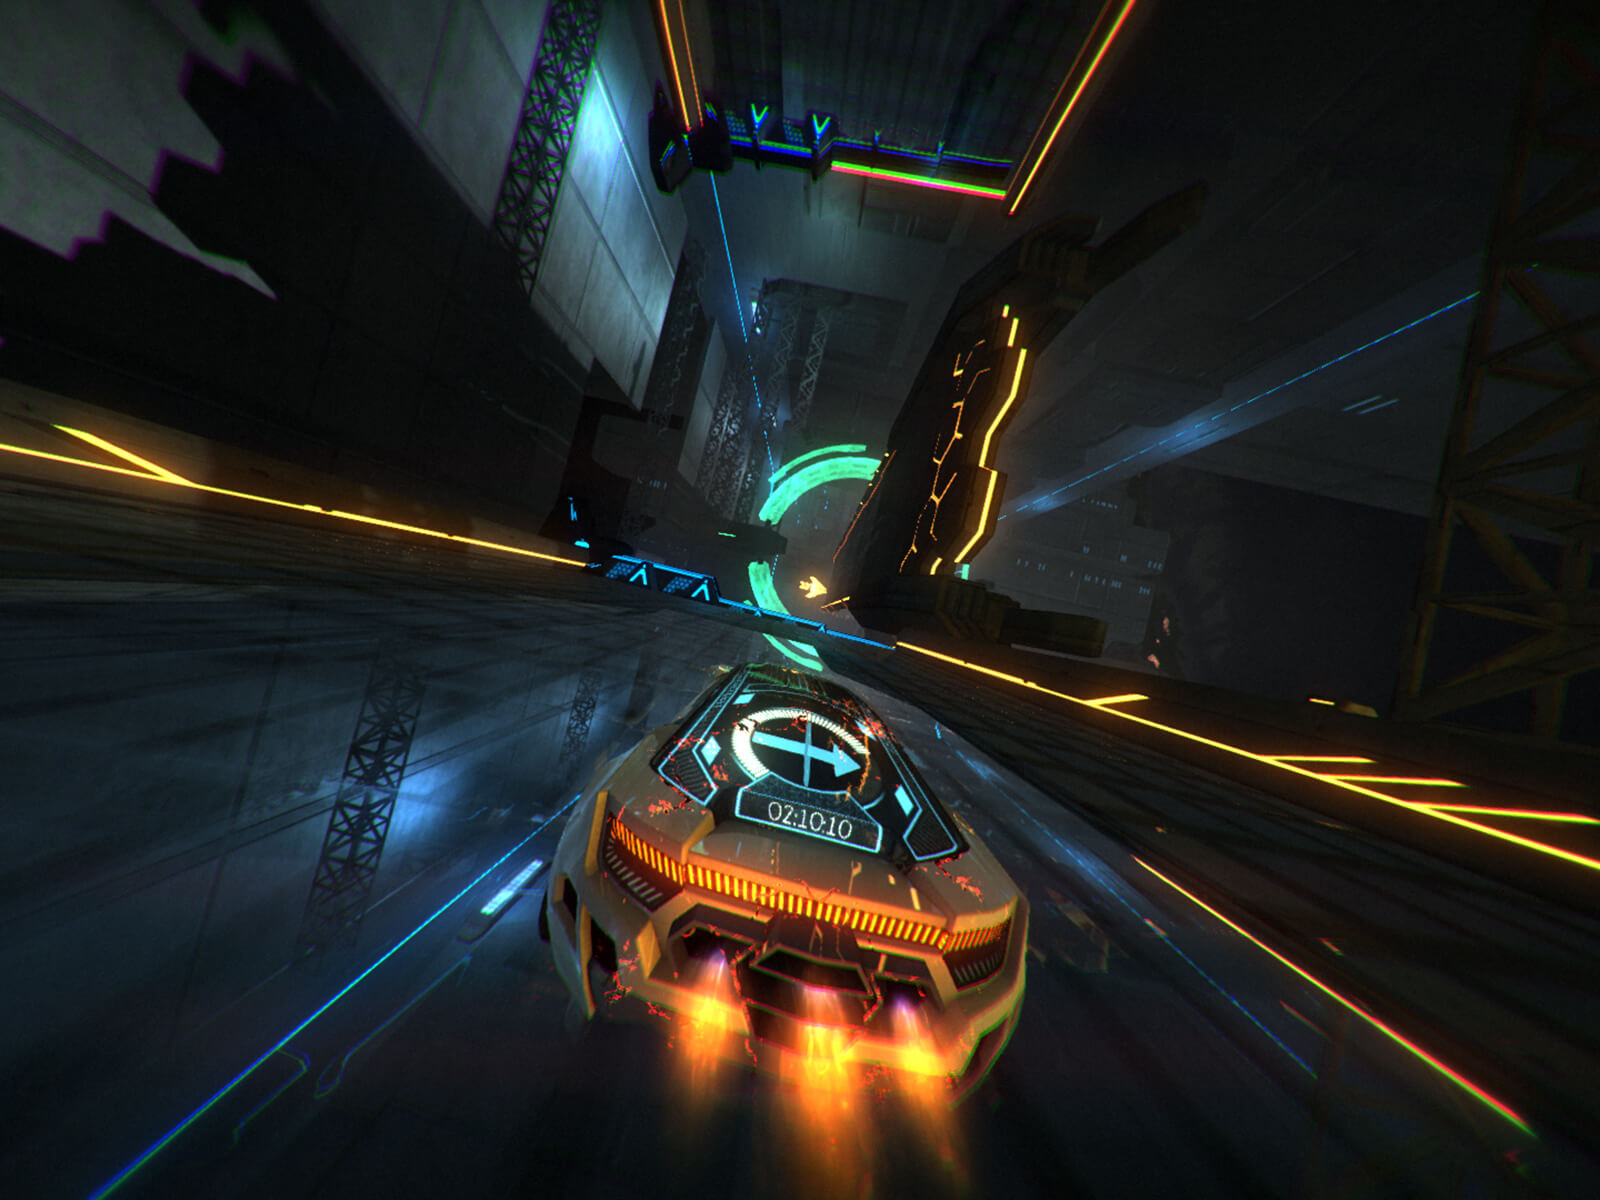 Screenshot from Refract Studios' Distance v1.0 of a neon-trimmed car racing through a darkened landscape